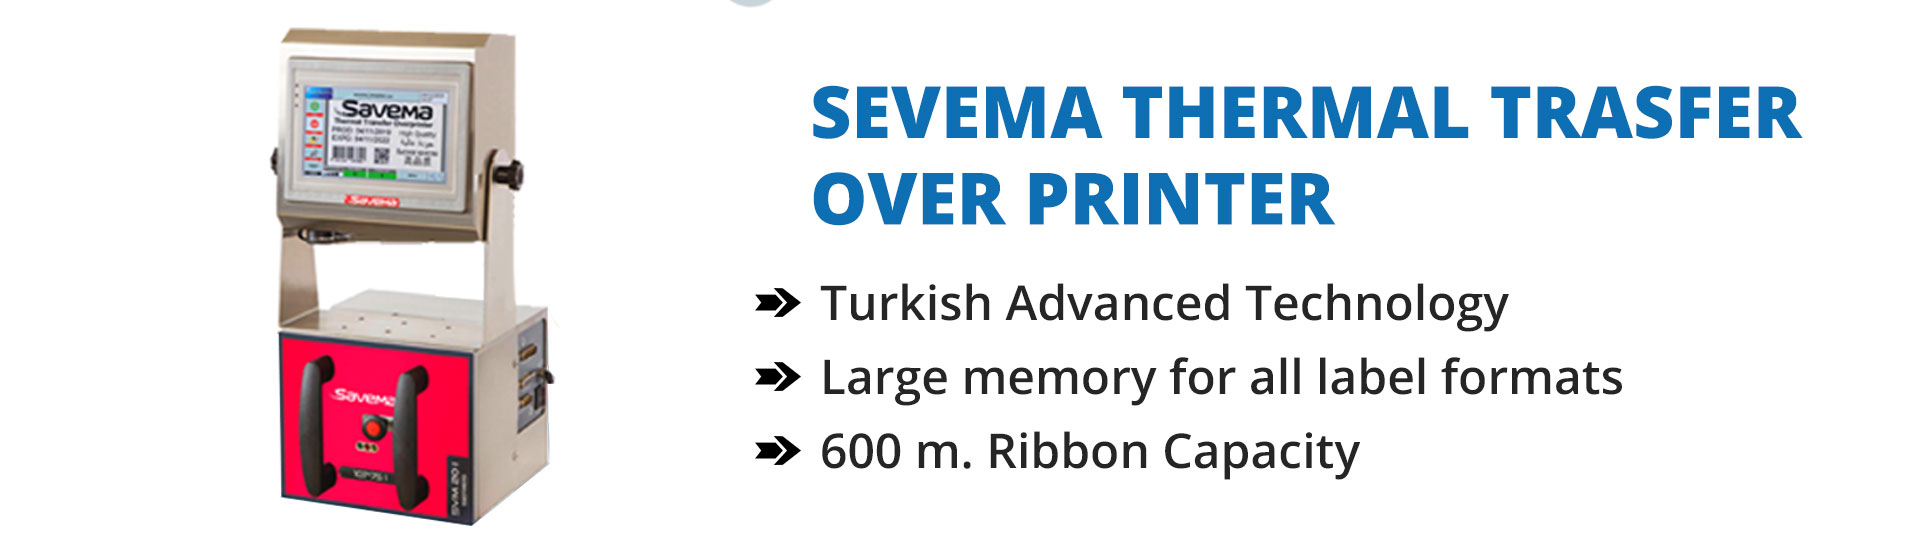 authorized dealer of savema thermal transfer over printer in south india